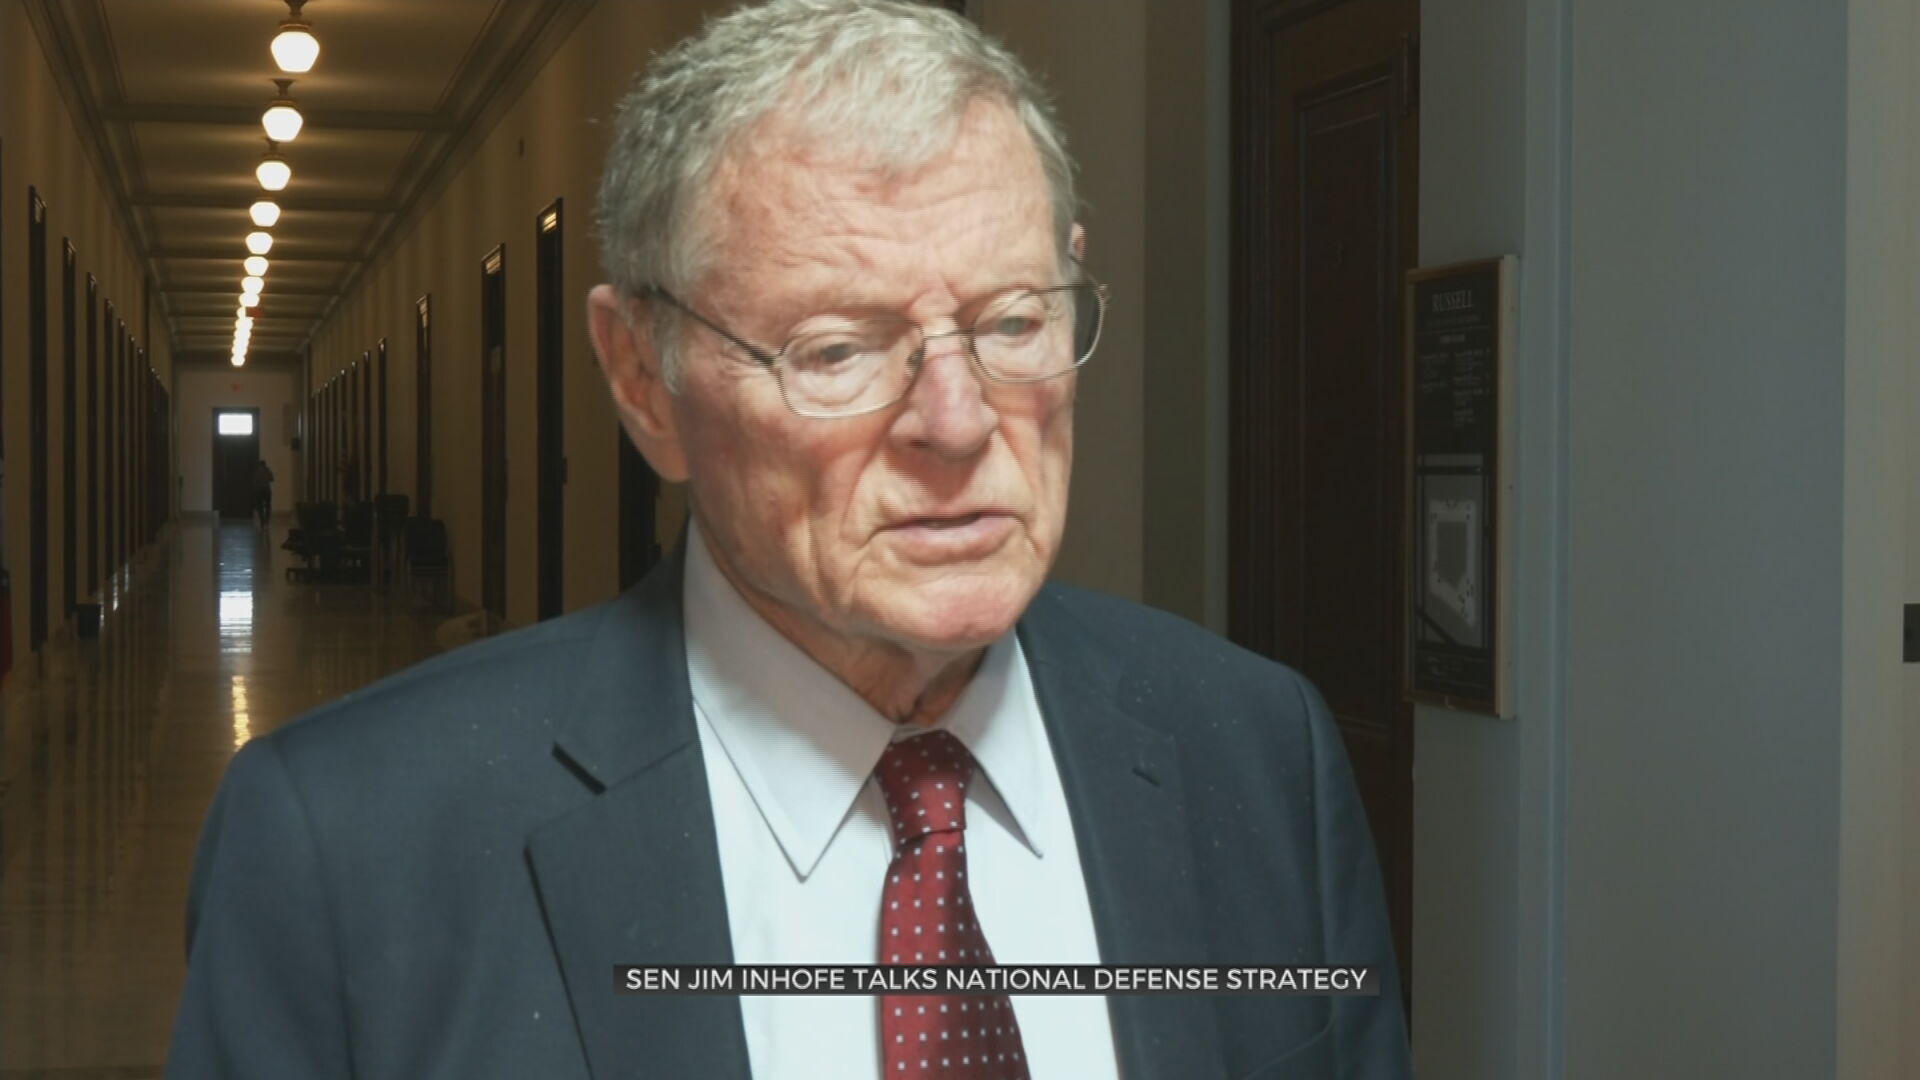 Sen. Inhofe Urges Policy Continuity In National Defense Strategy 